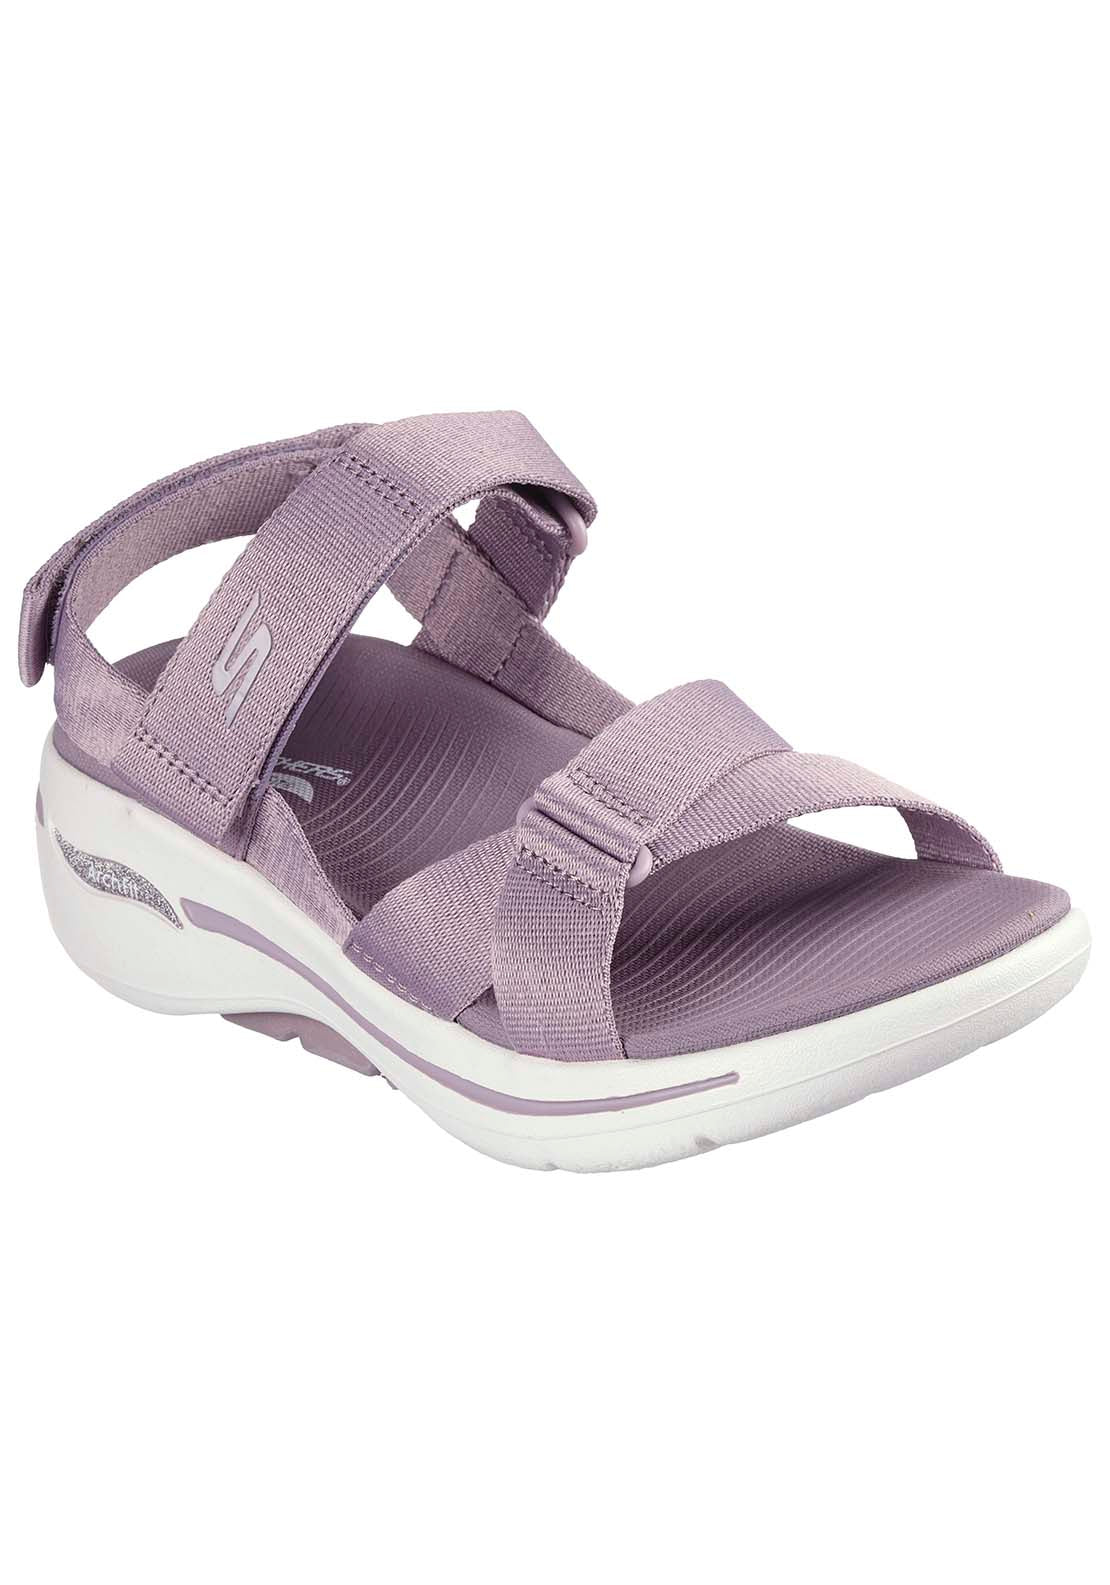 Skechers Go Walk Arch Fit Sandal 1 Shaws Department Stores